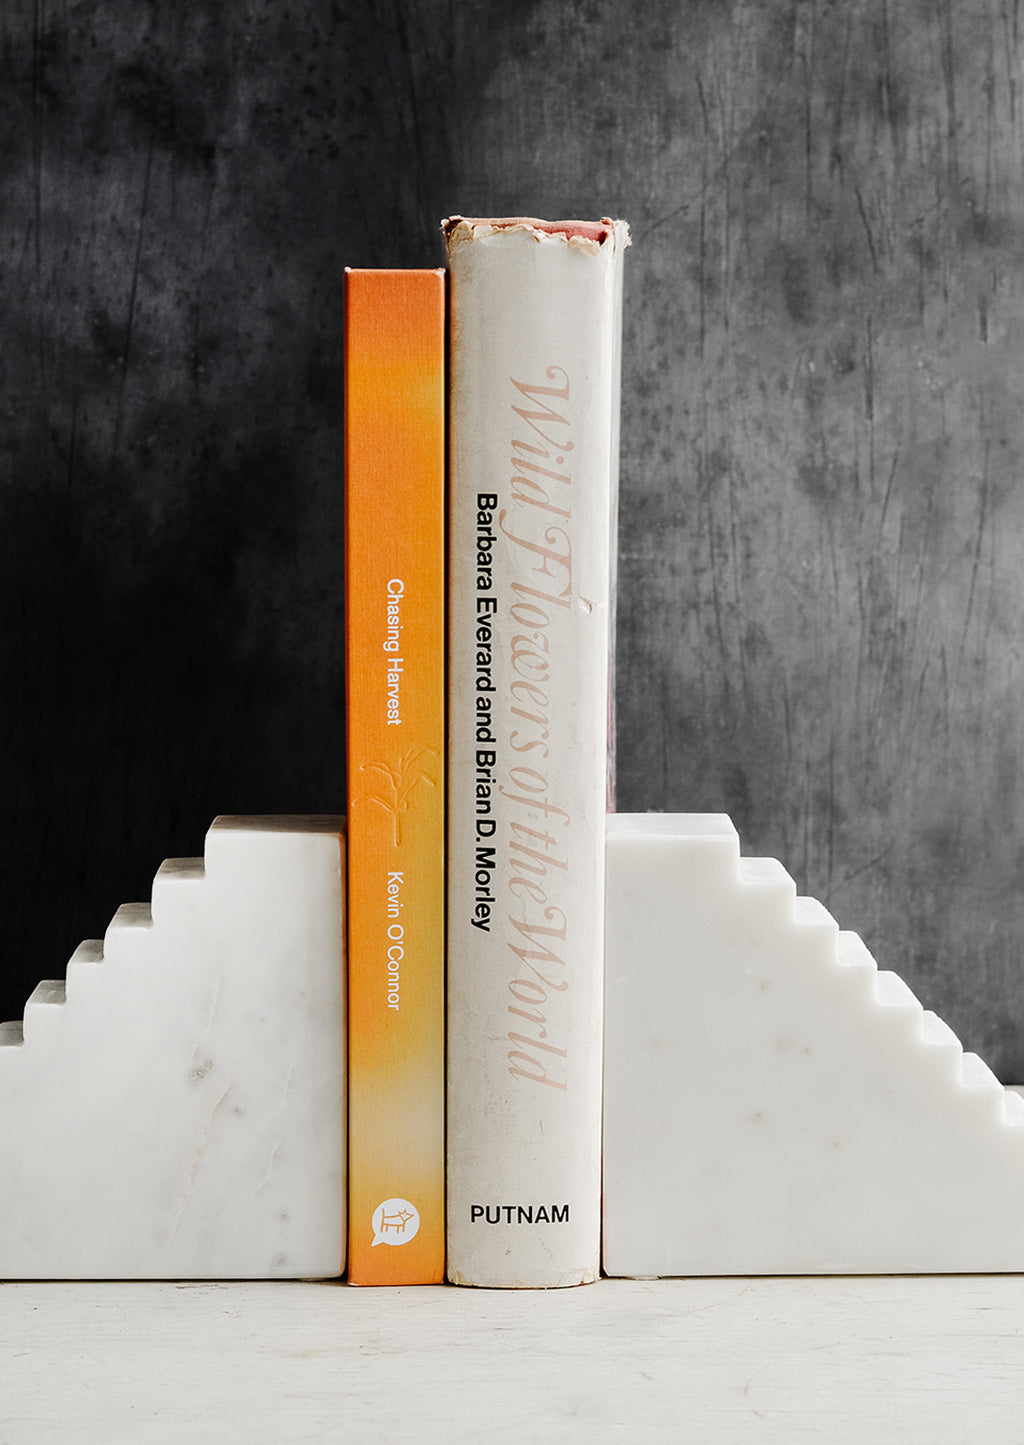 2: A pair of white marble bookends with staircase design, shown with two books.